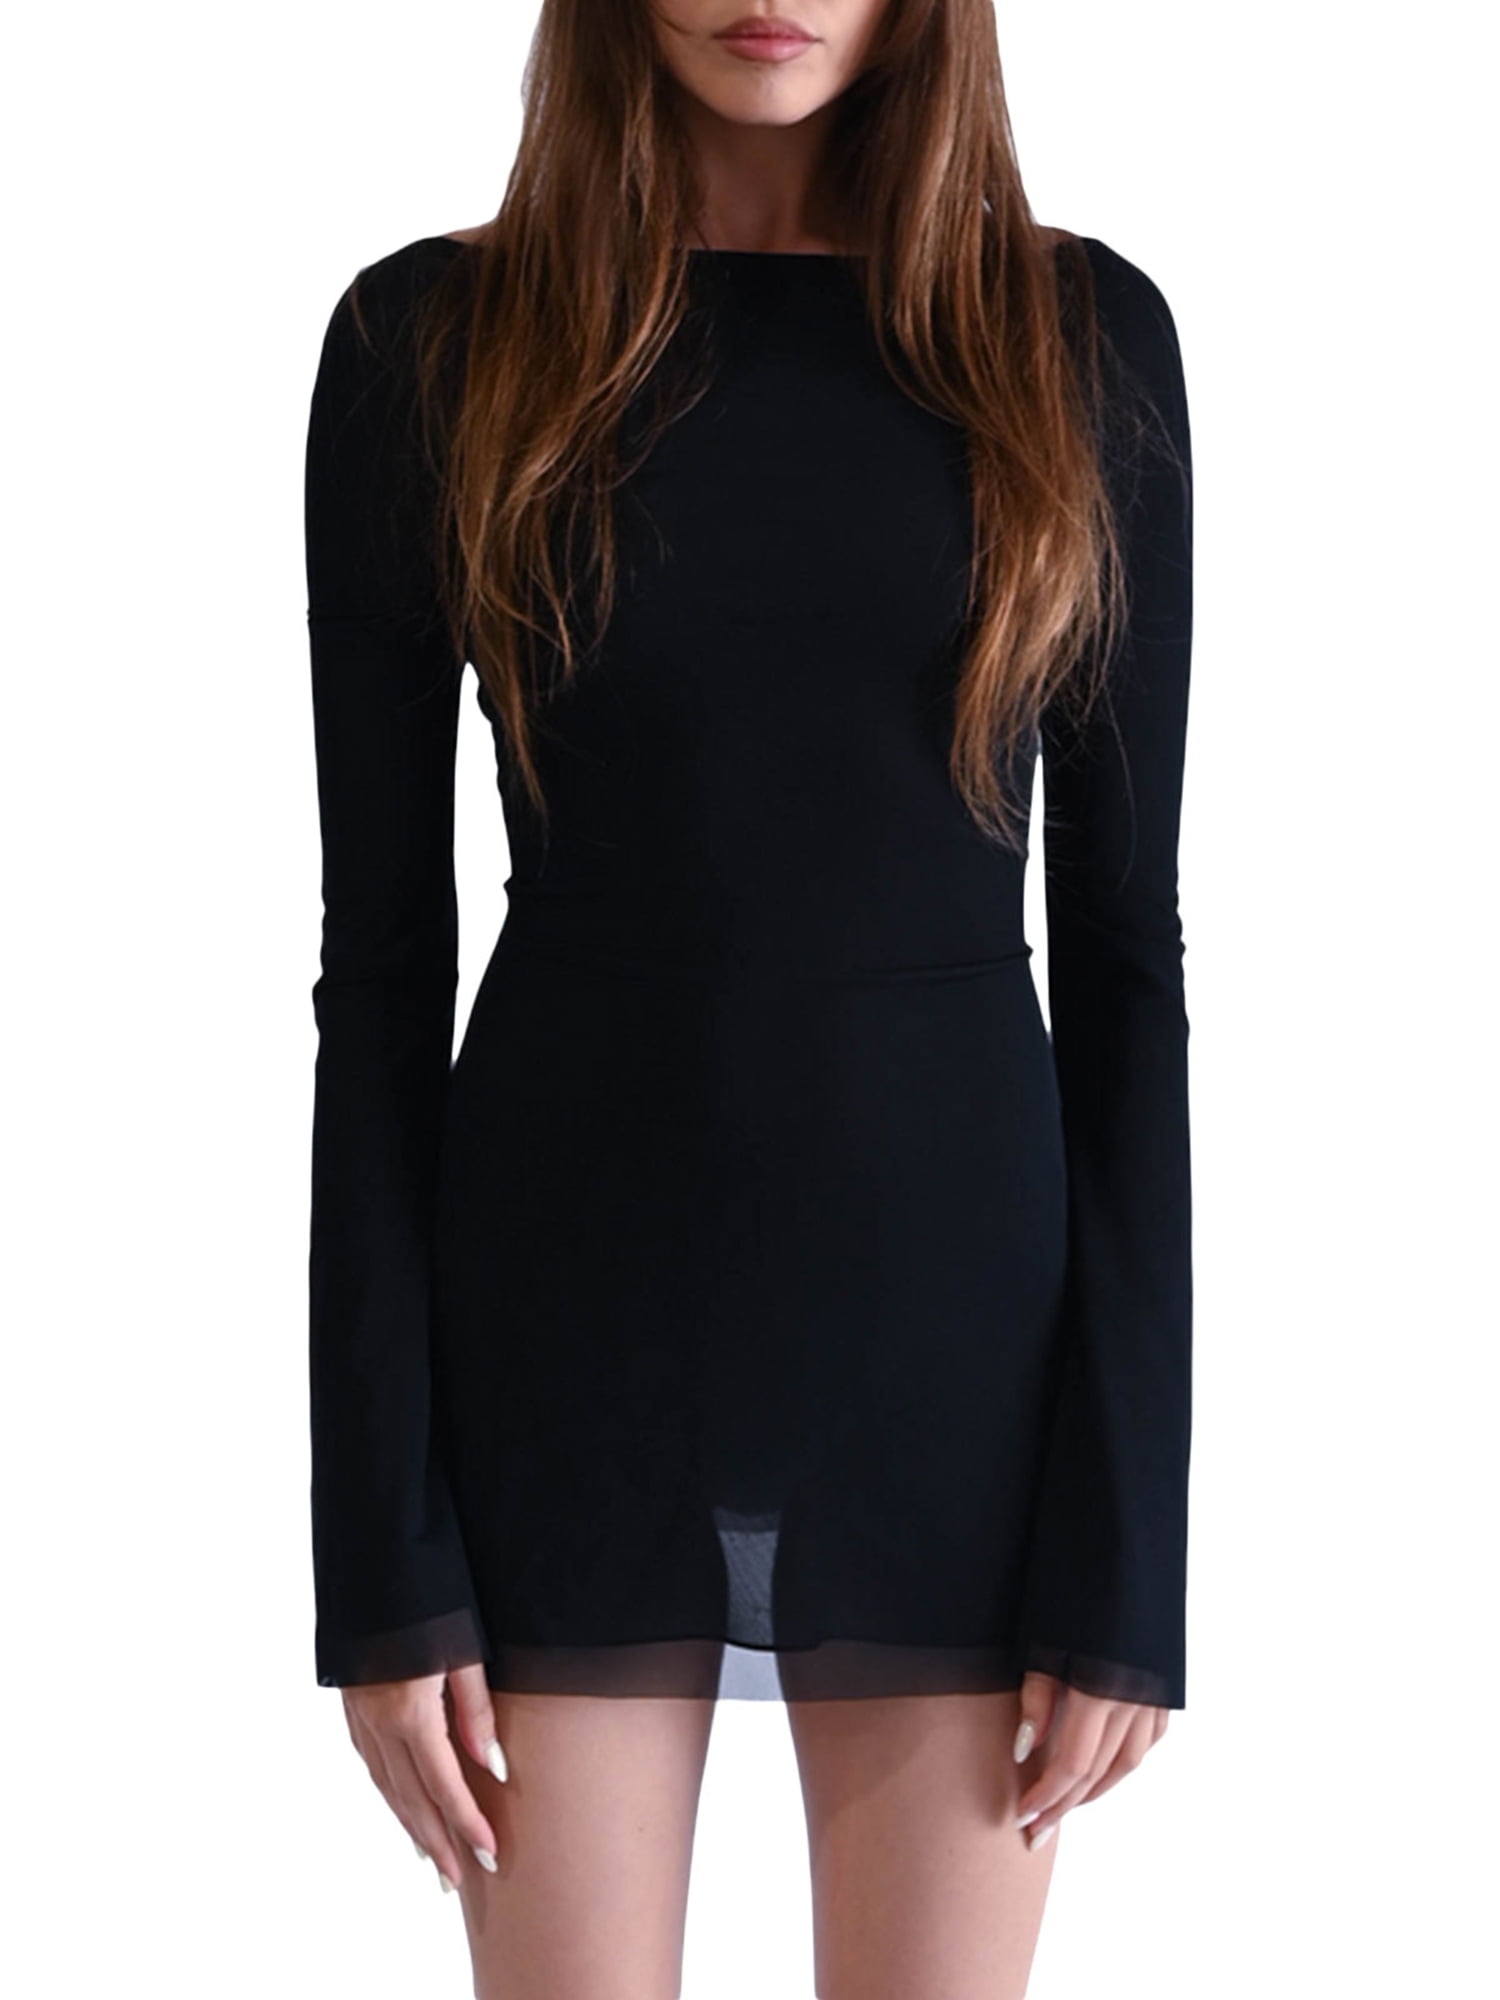 Women's Rompers Summer Bodycon Y2K Sexy Bodysuits Mesh Sheer Shapwear  Vintage Body Shaper See Through Turtle Neck Long Sleeve Tops